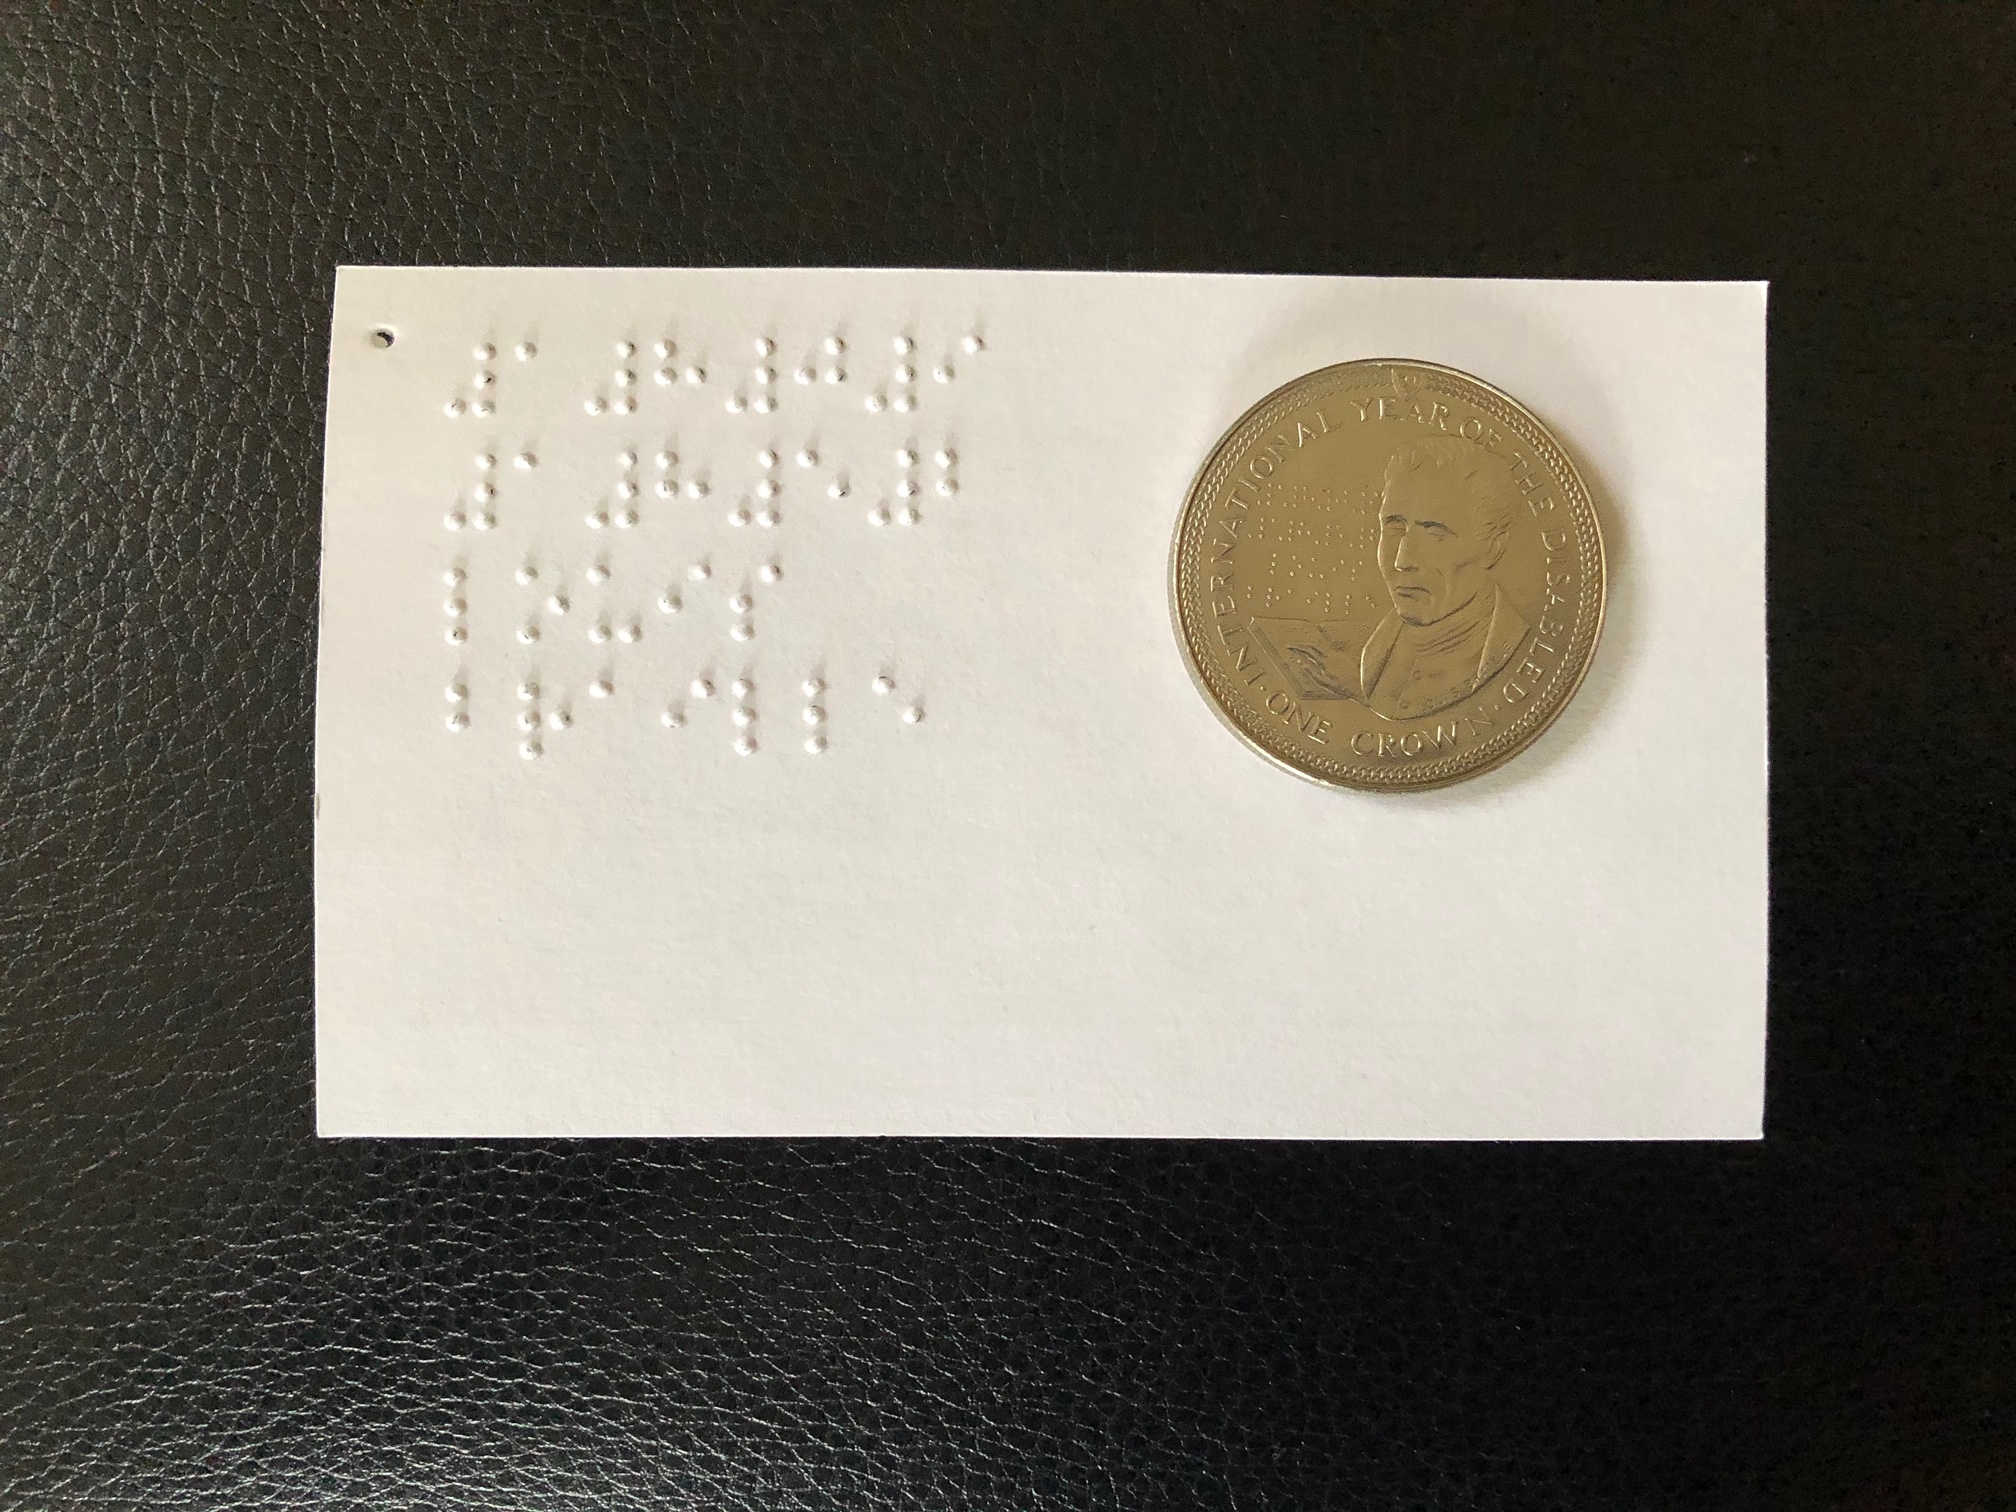 Isle of Man 1 Crowne and braille script